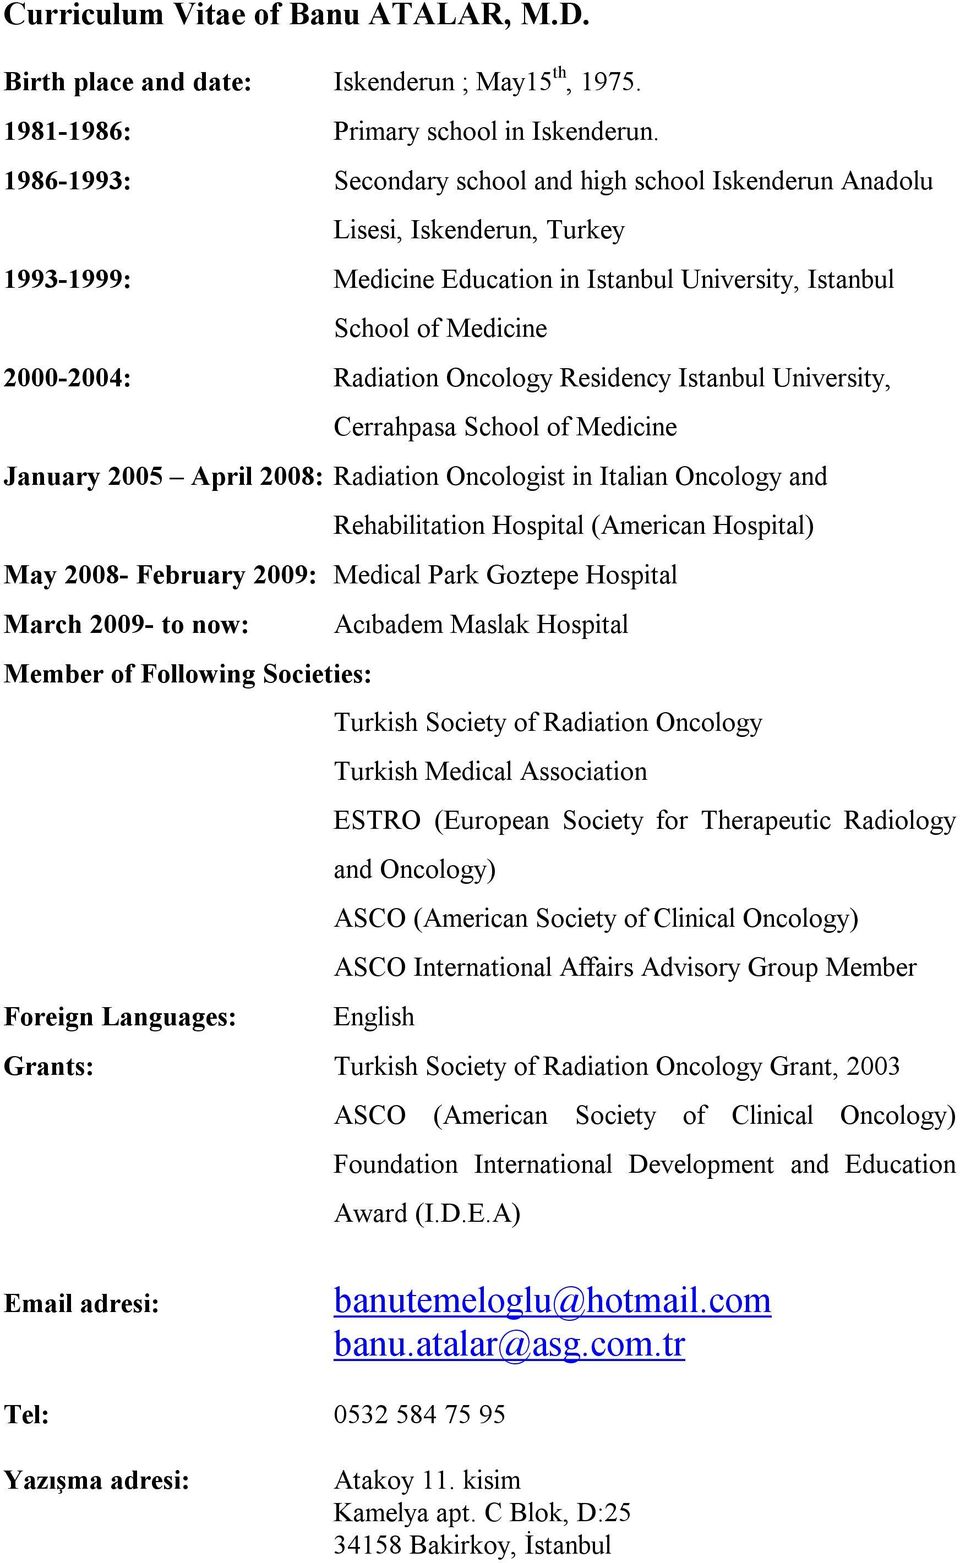 Oncology Residency Istanbul University, Cerrahpasa School of Medicine January 2005 April 2008: Radiation Oncologist in Italian Oncology and Rehabilitation Hospital (American Hospital) May 2008-